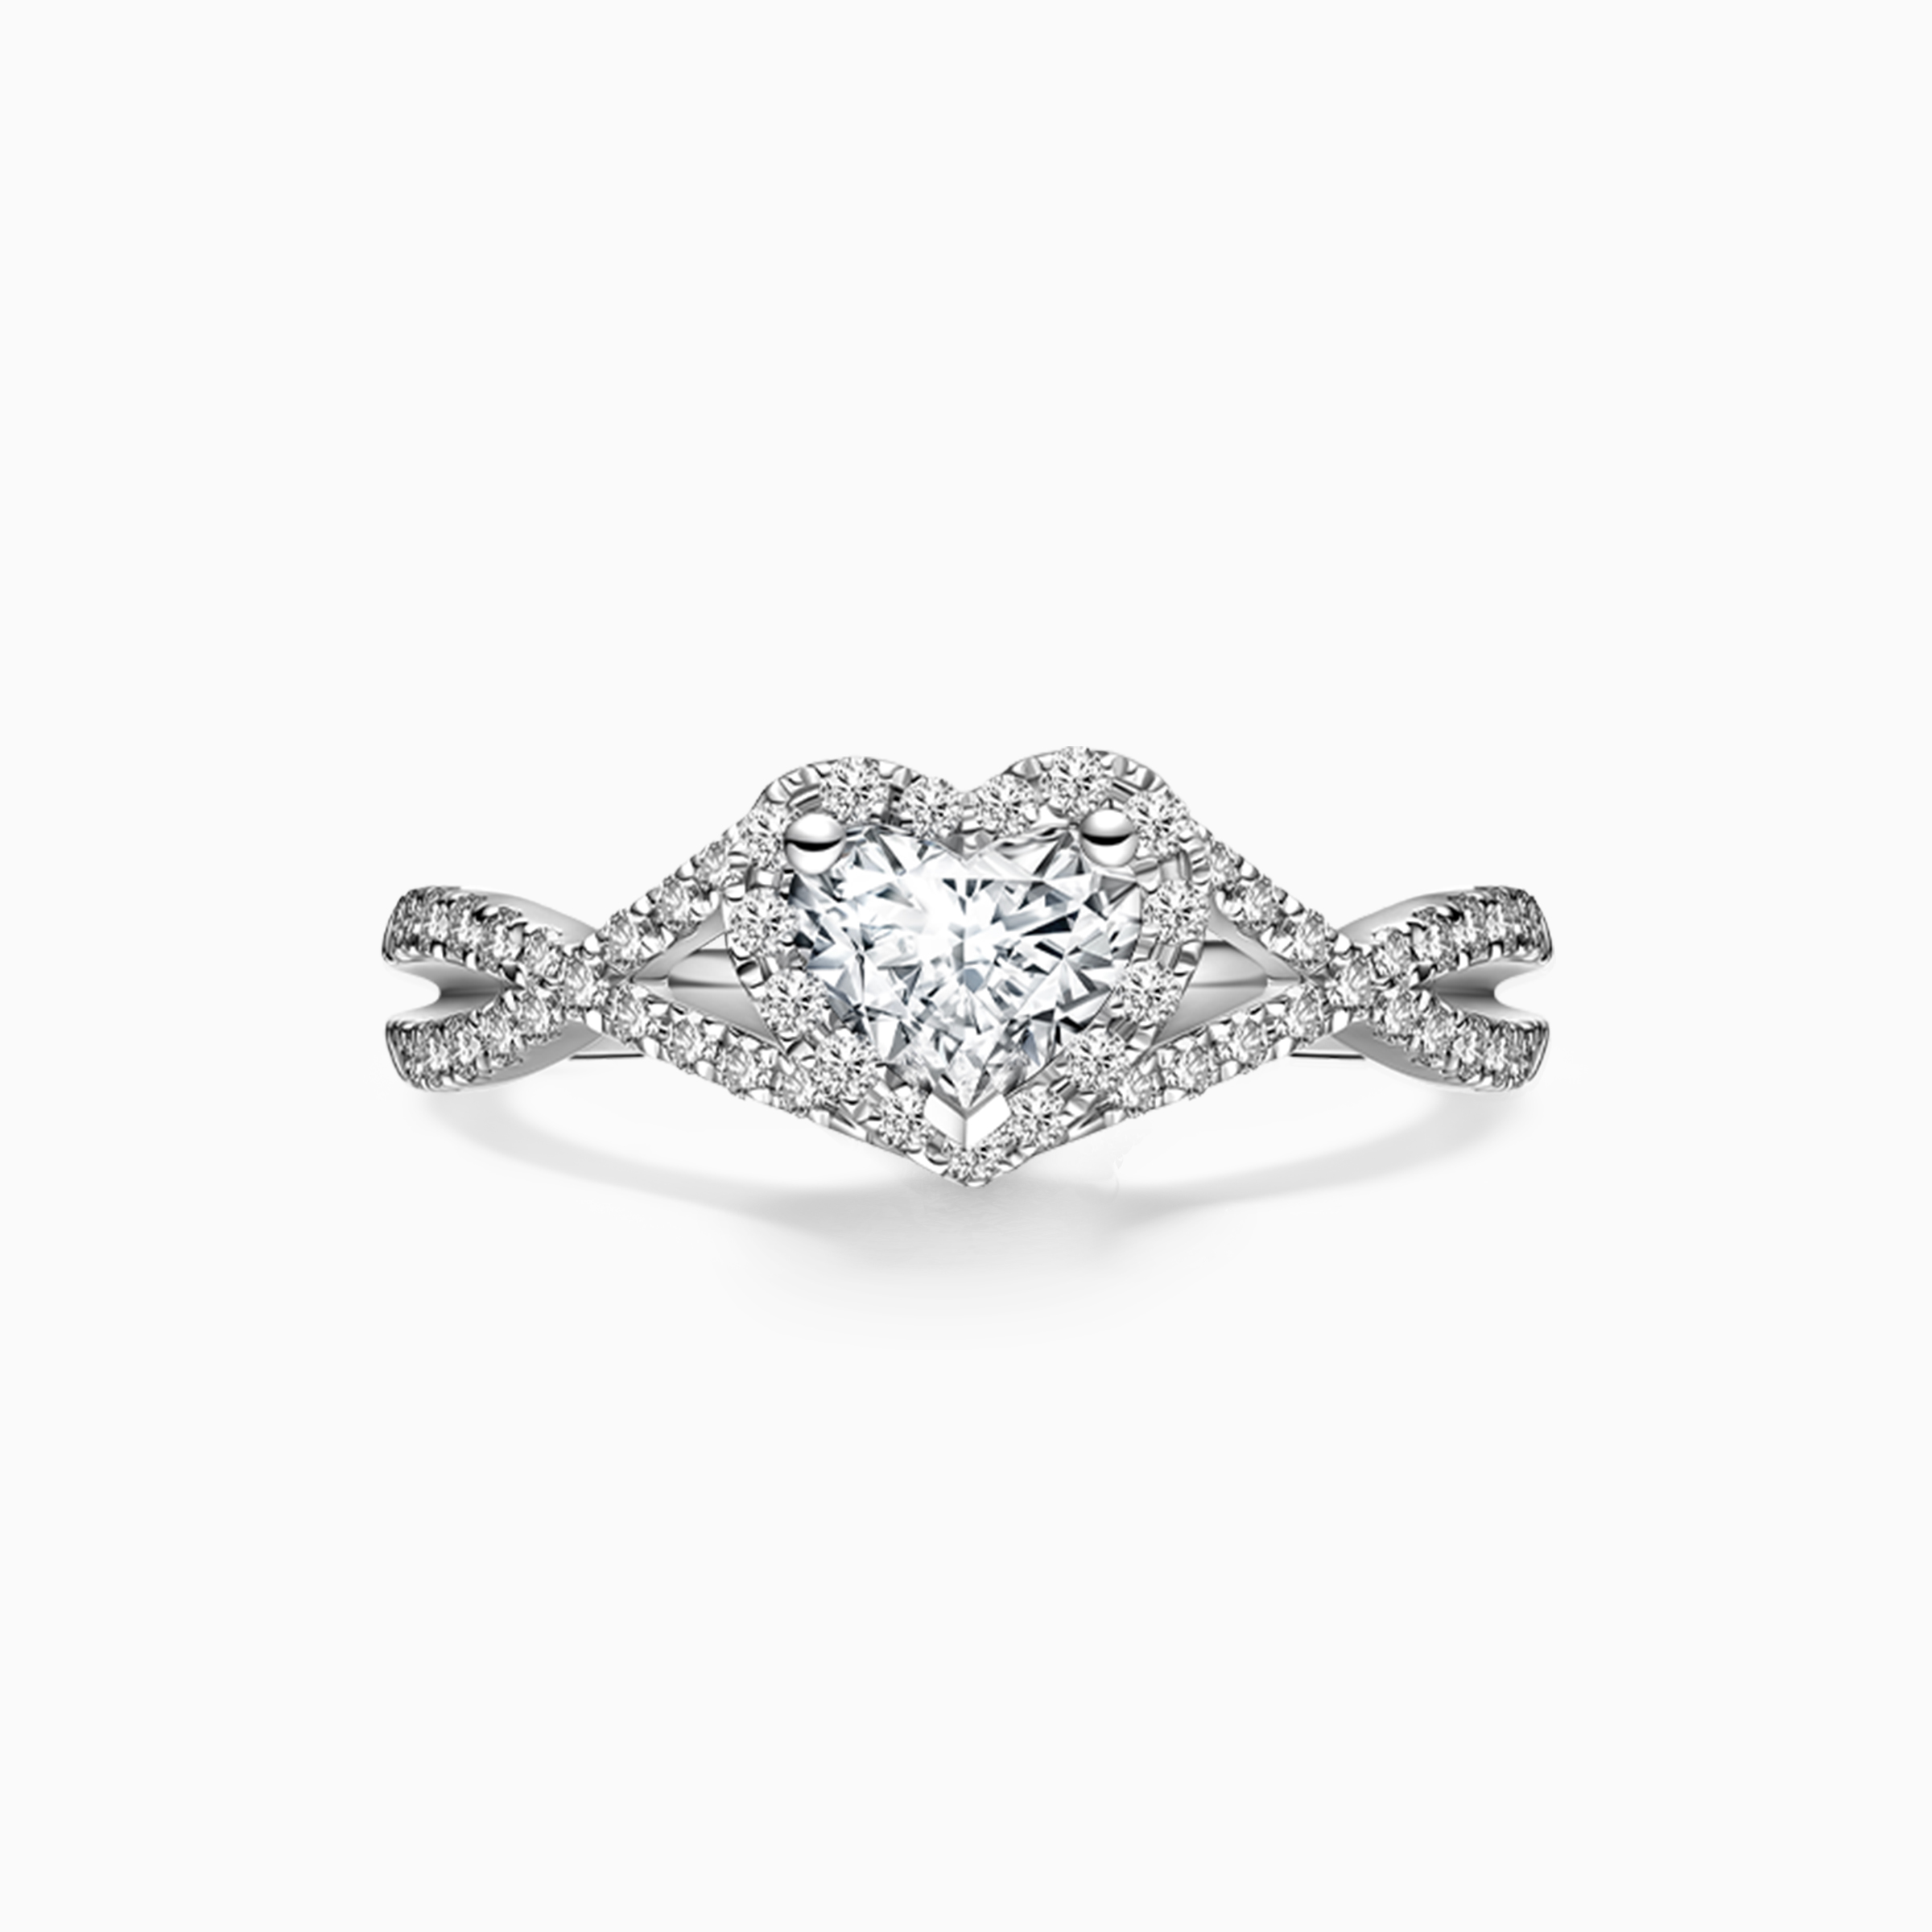 Darry Ring halo heart promise ring in white gold